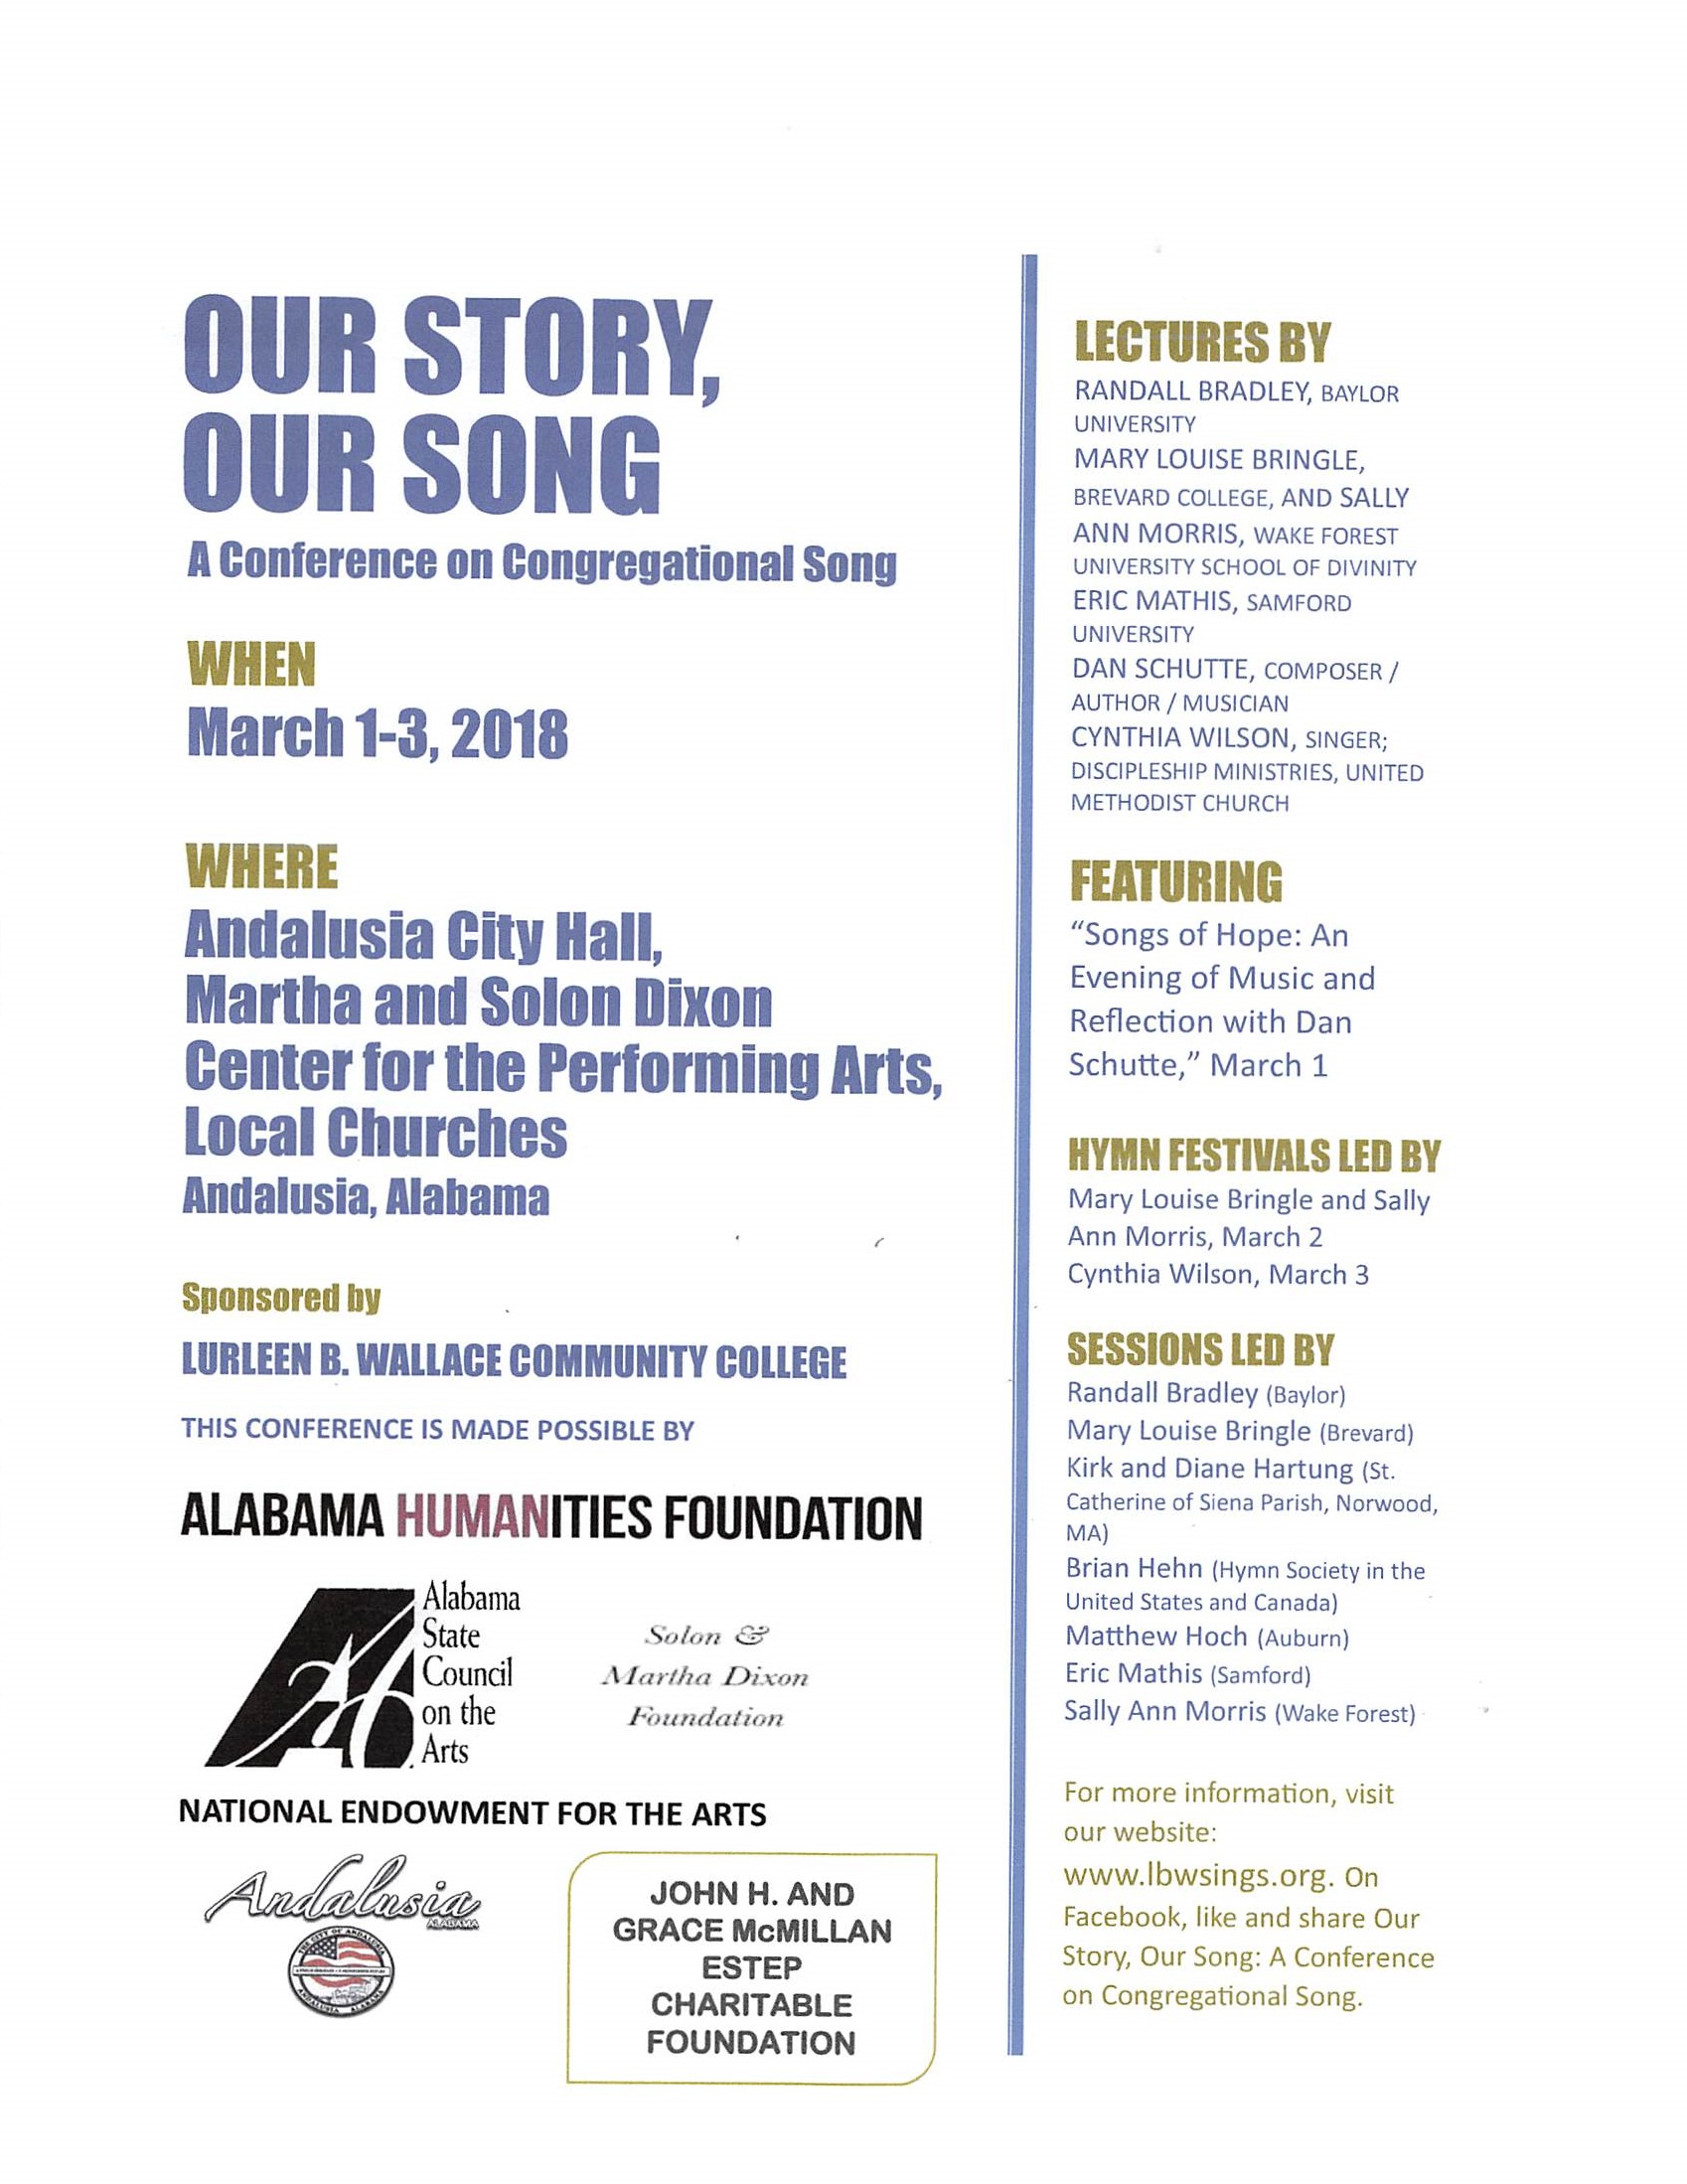 Our Story Our Song Flyer